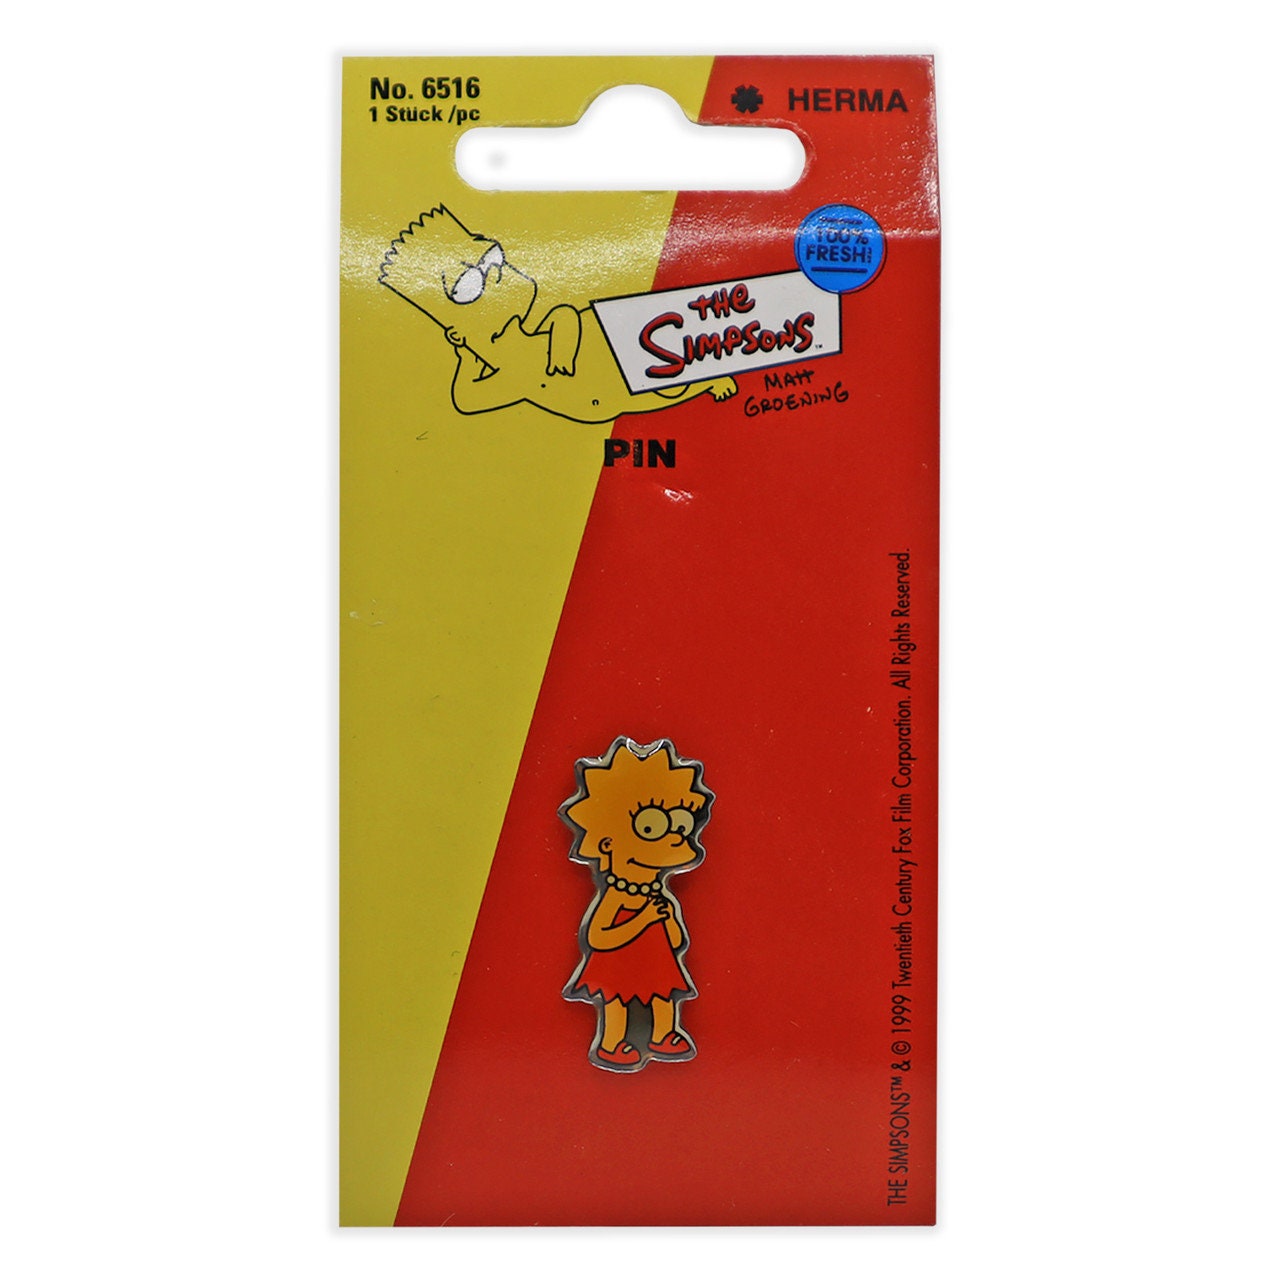 The Simpsons Vintage Rare Collectable Lisa Pin - 1999